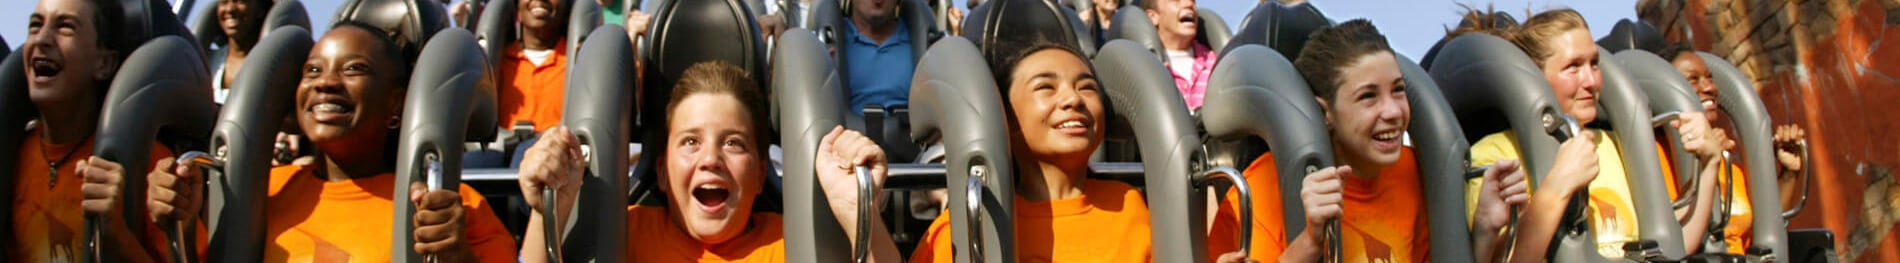 A Youth Group riding SkeiKra at Busch Gardens Tampa Bay.